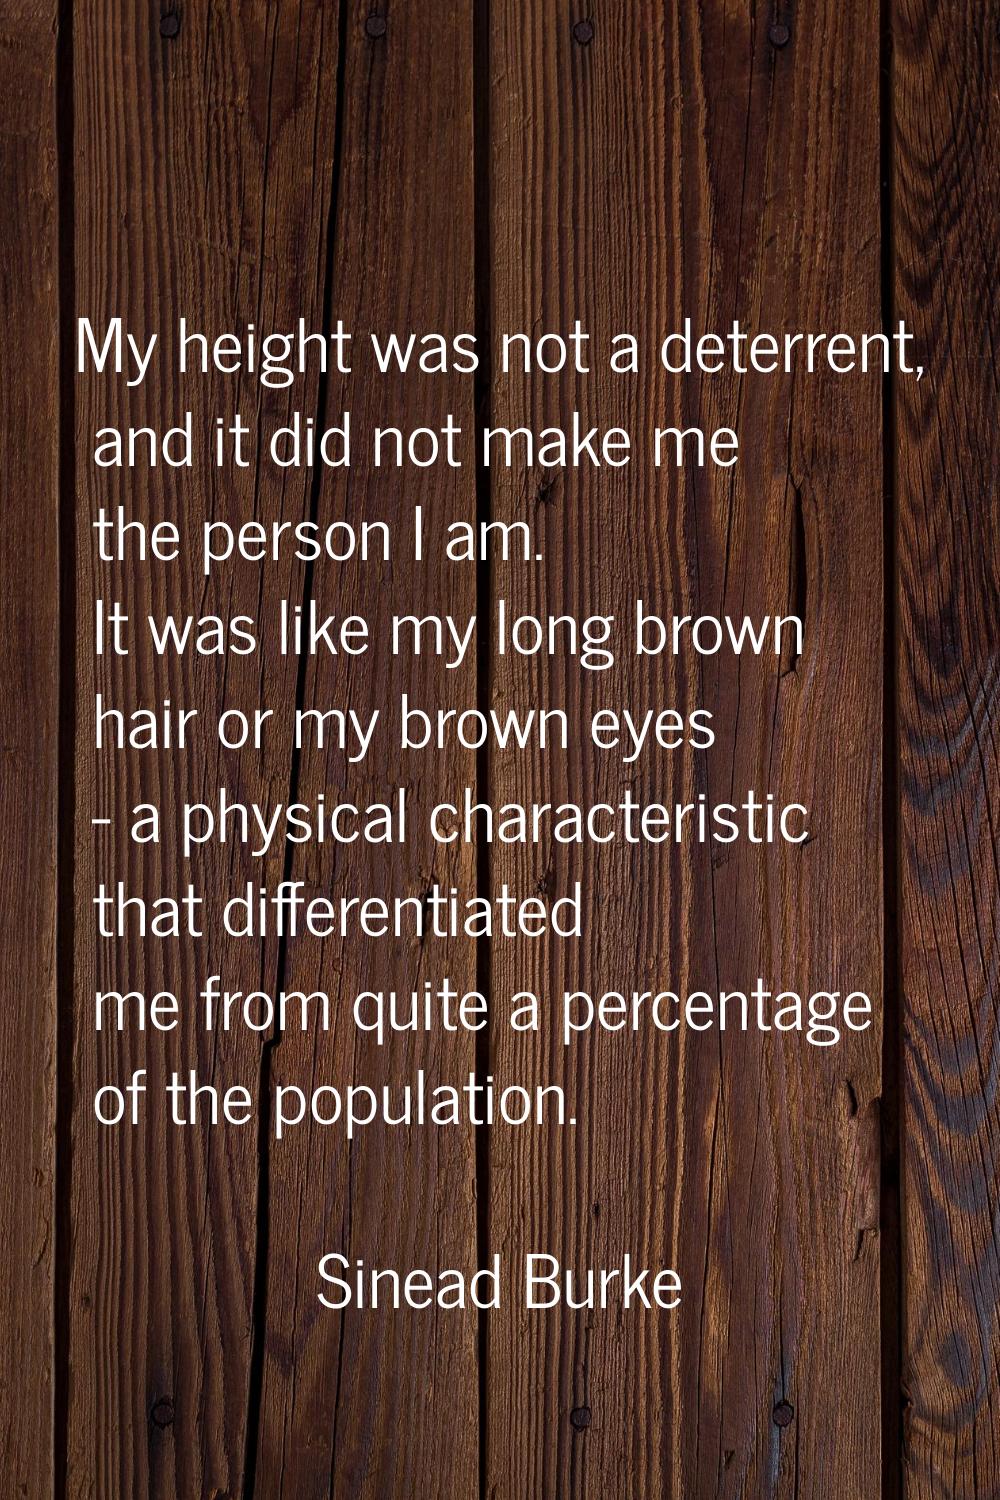 My height was not a deterrent, and it did not make me the person I am. It was like my long brown ha